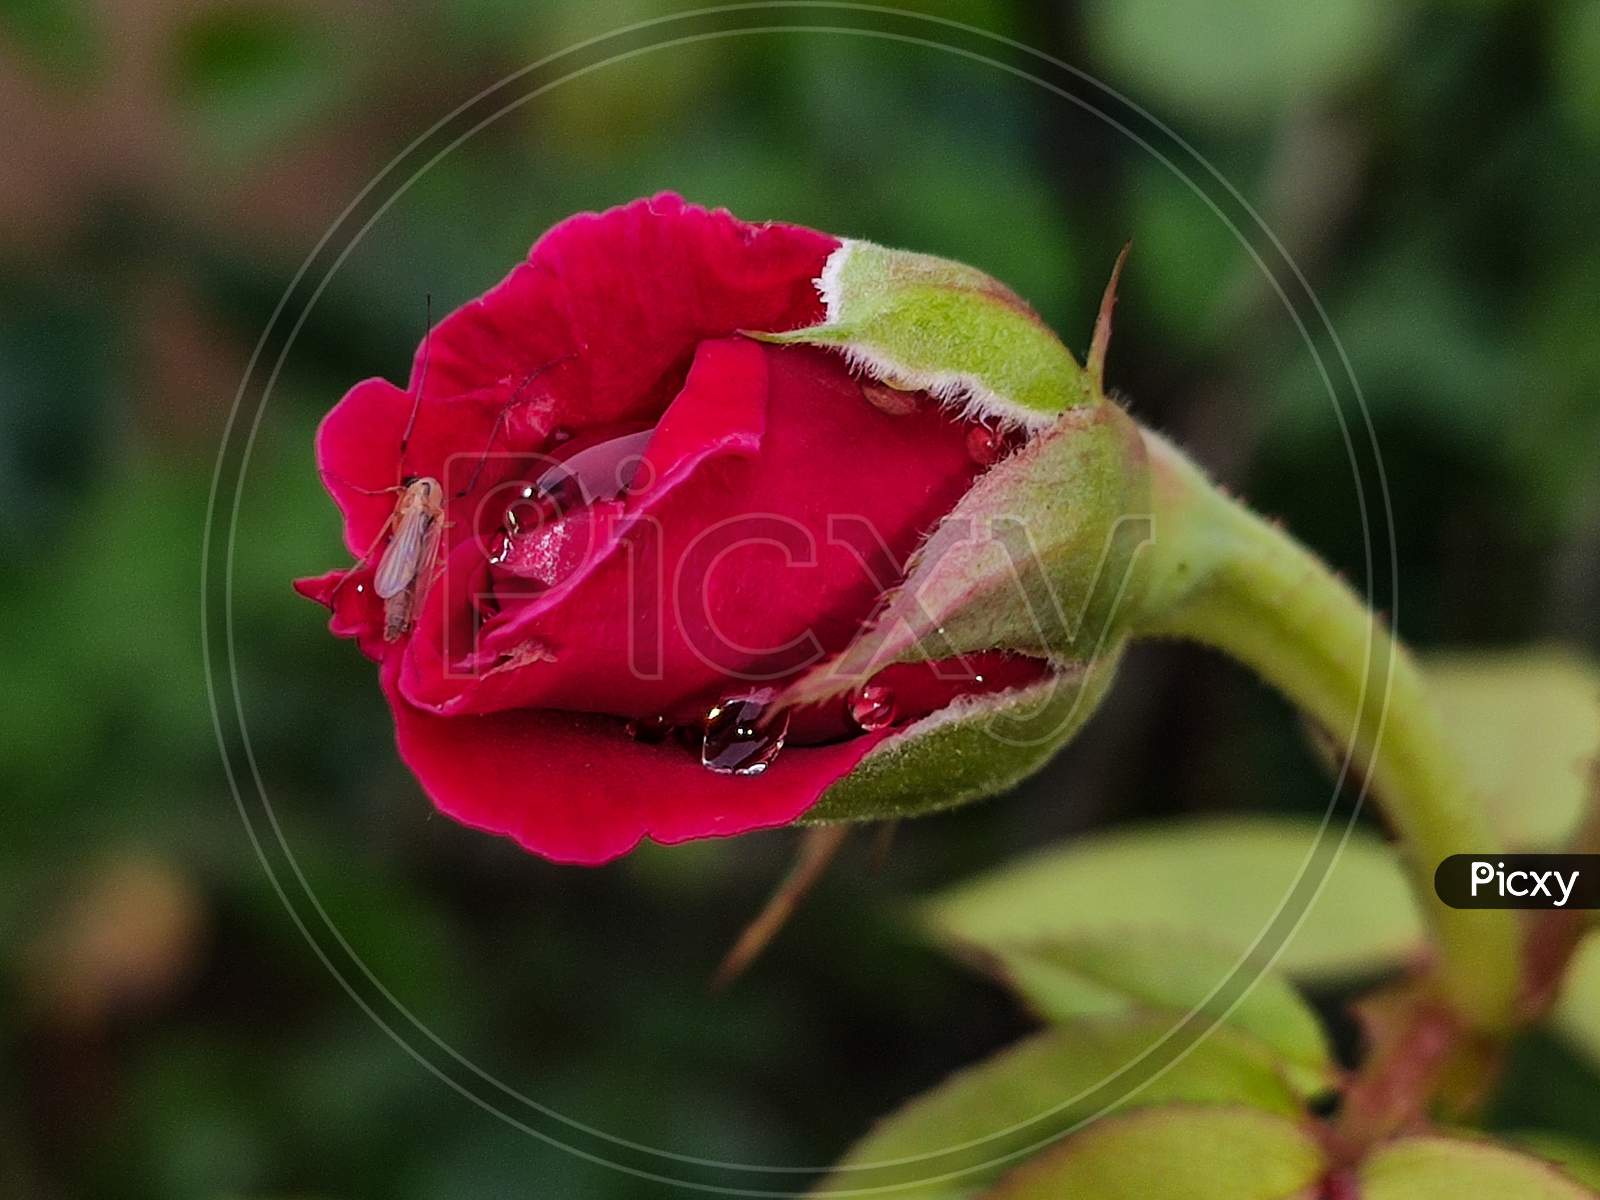 Red rose bud with dew drops